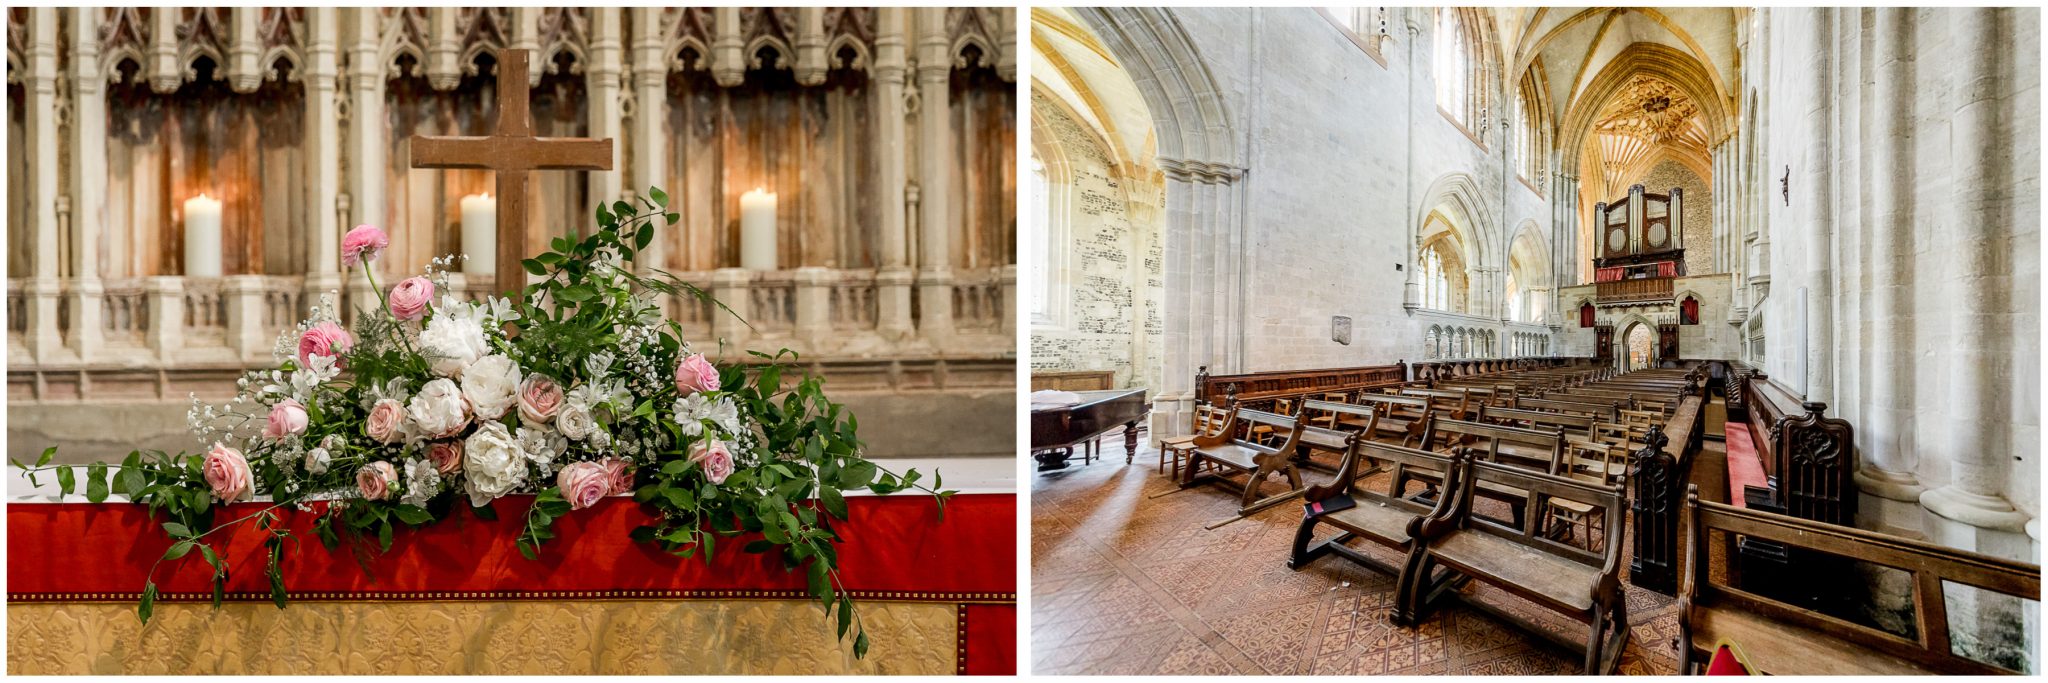 Views of Milton Abbey with flowers on the altar